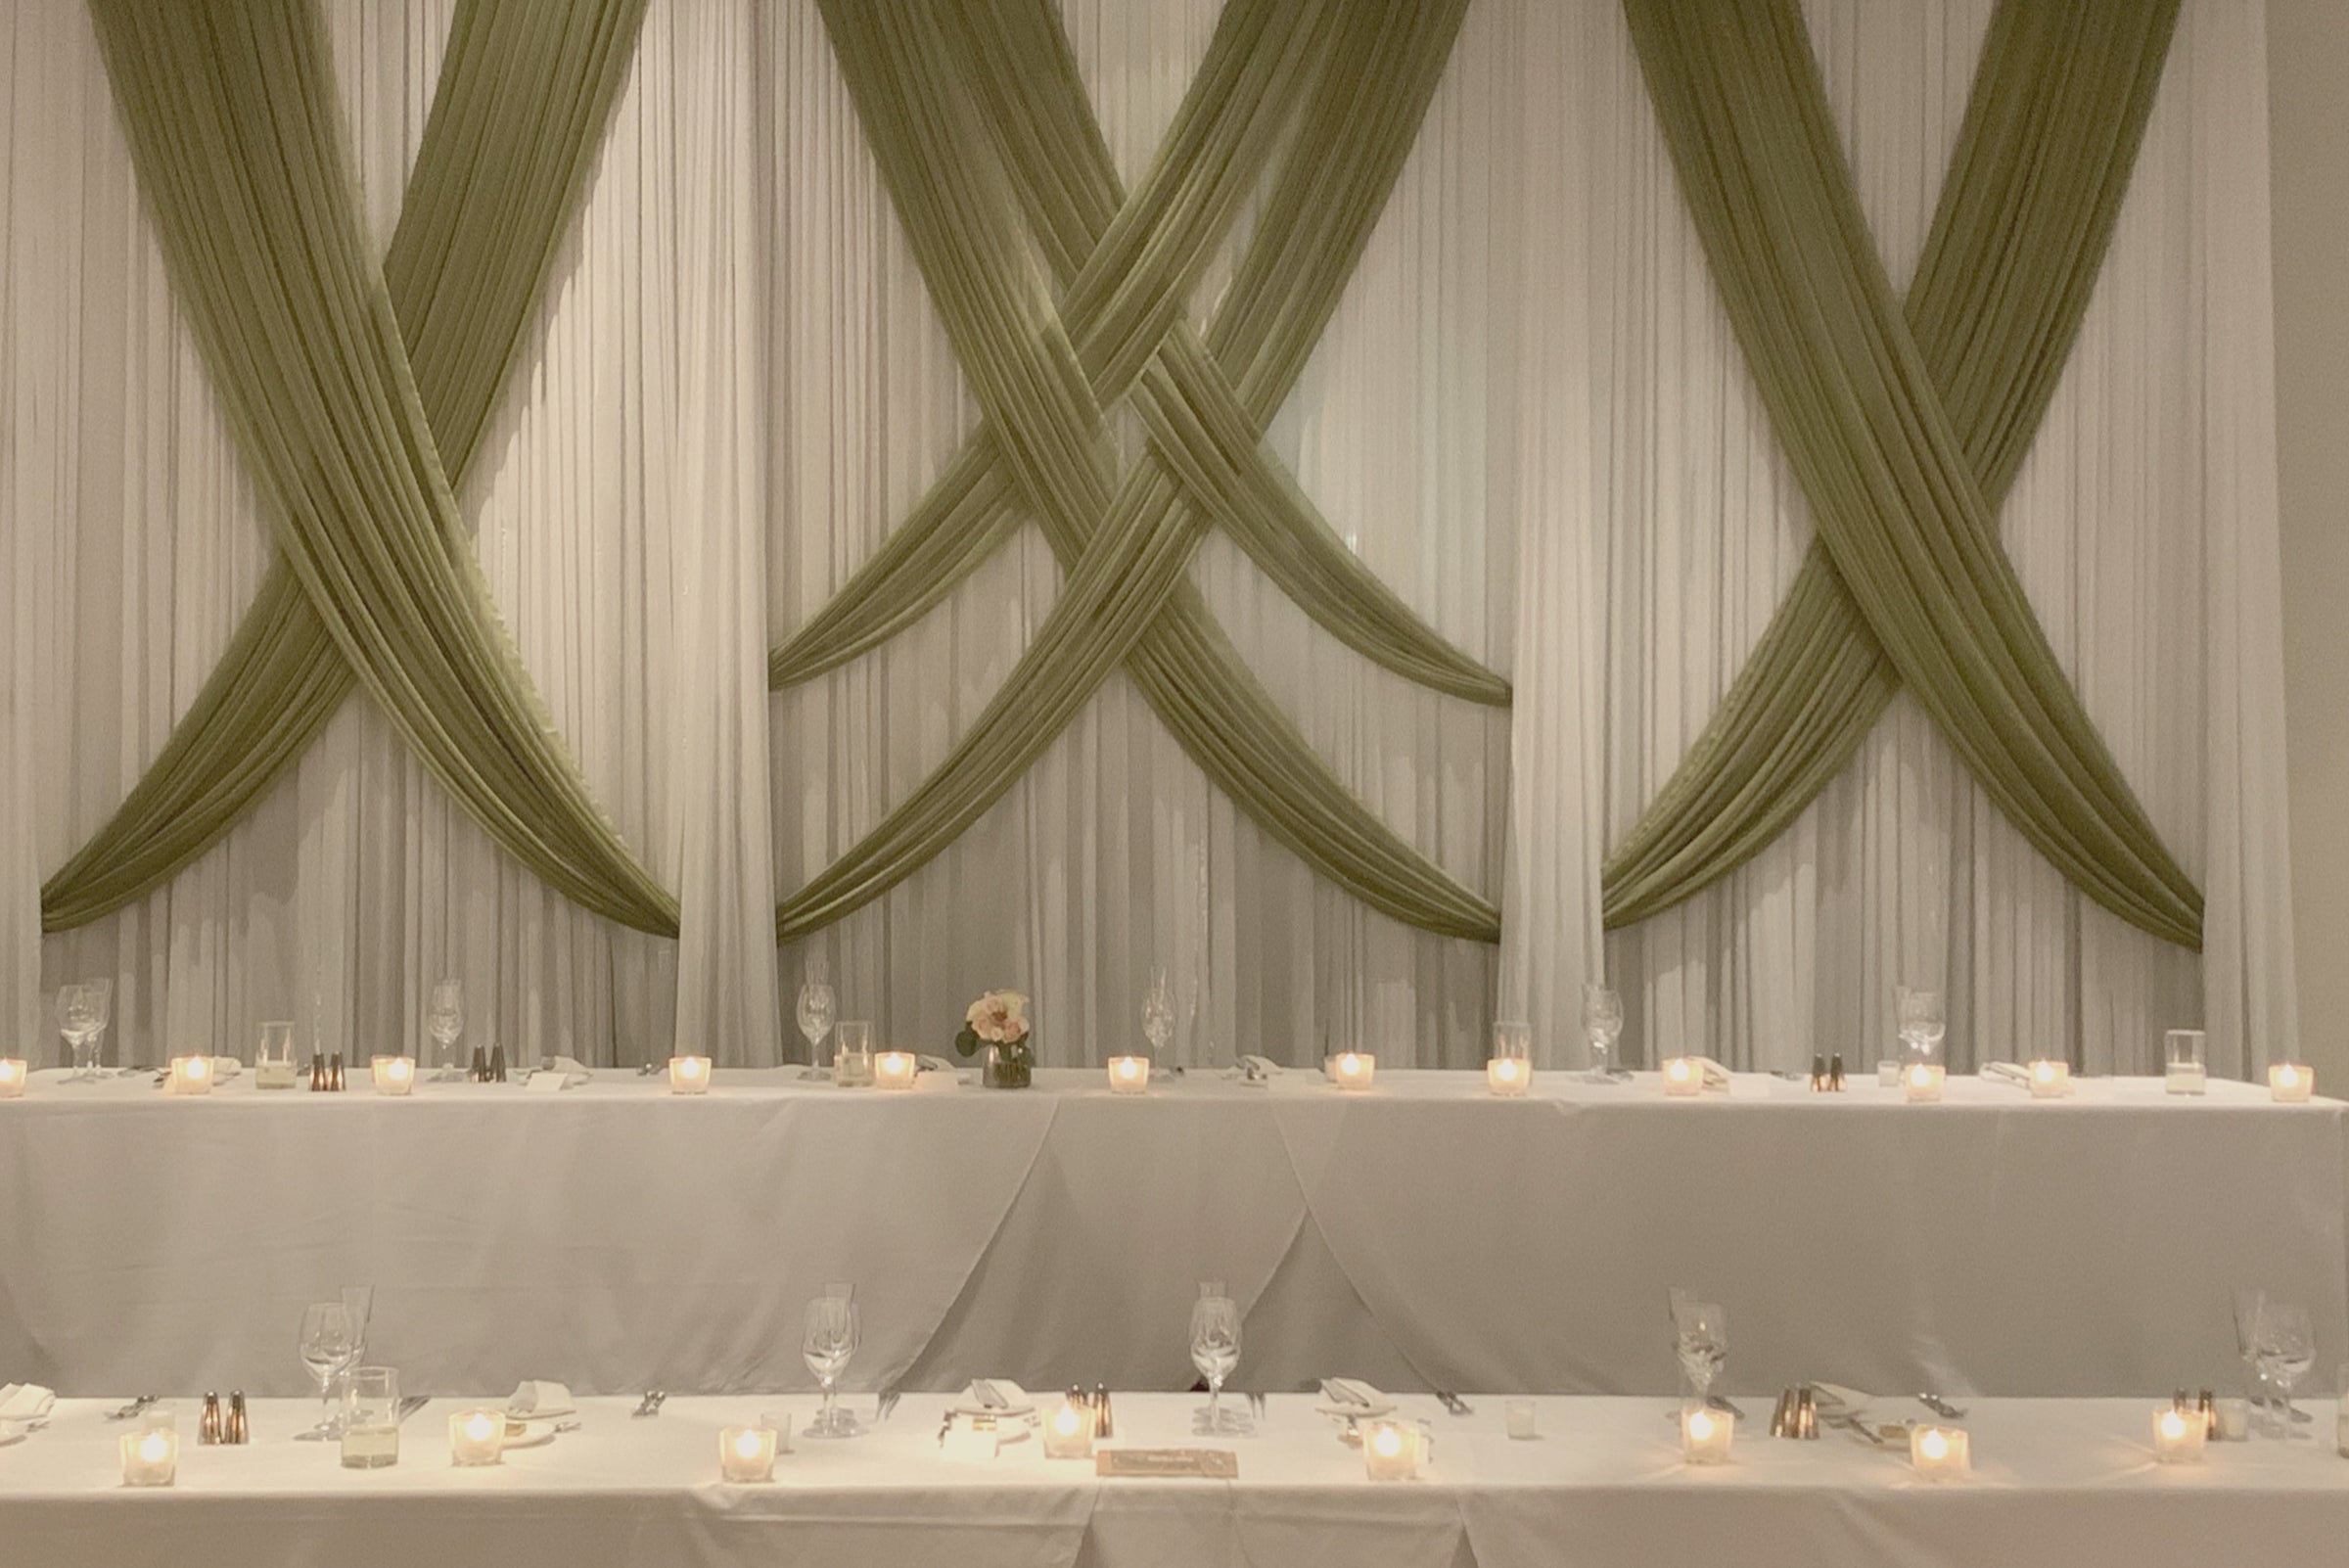 White fabric draped wall with sage green crossed fabric draped over the white